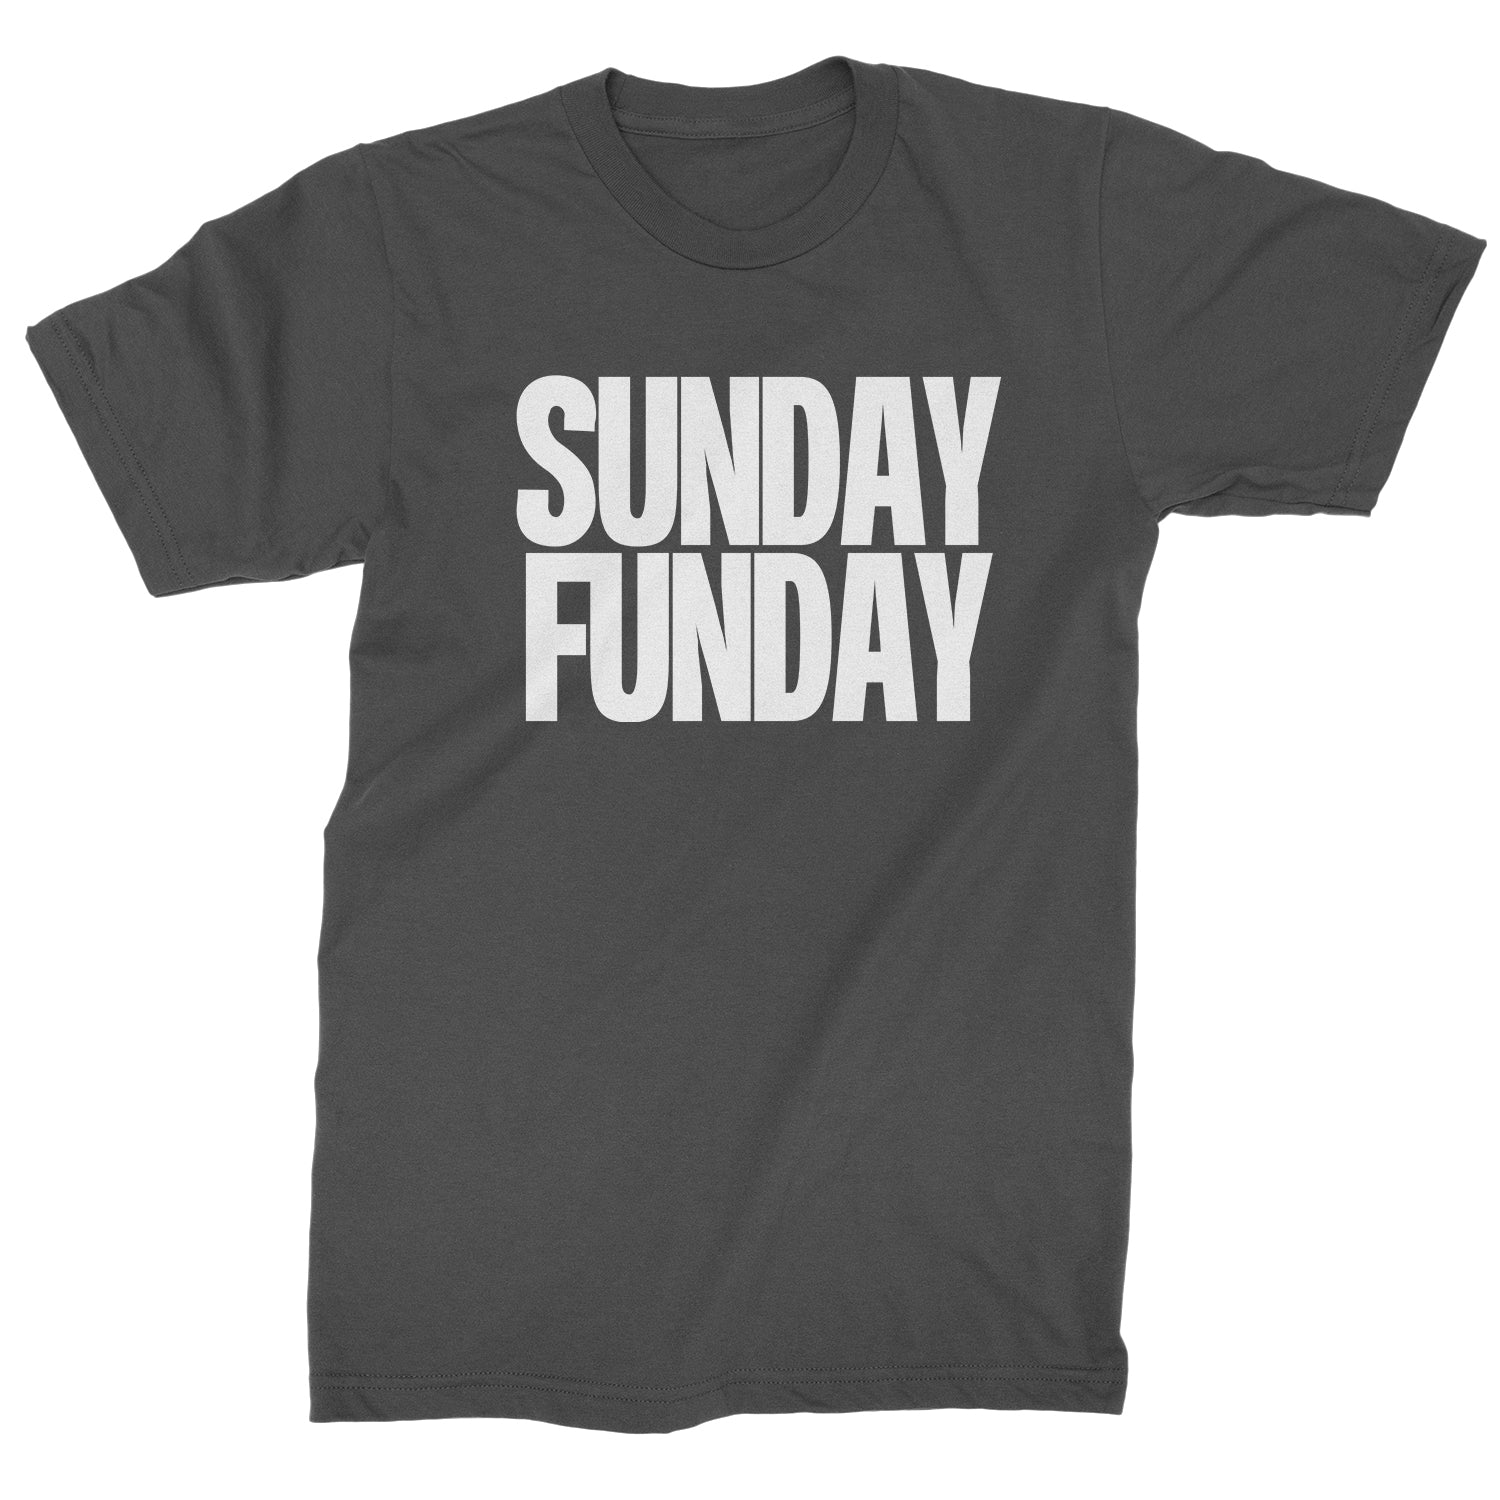 Sunday Funday Mens T-shirt day, drinking, fun, funday, partying, sun, Sunday by Expression Tees